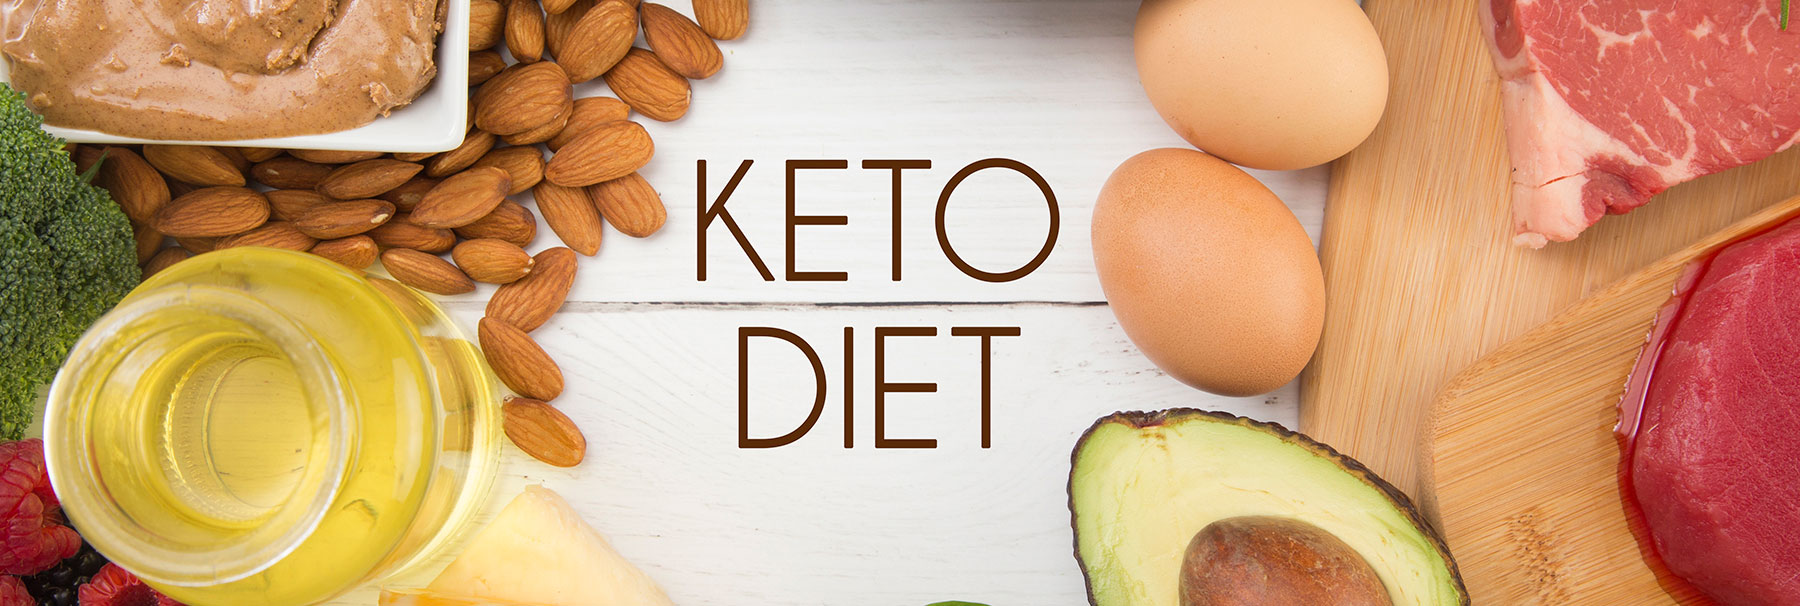 keto diet surrounded by foods